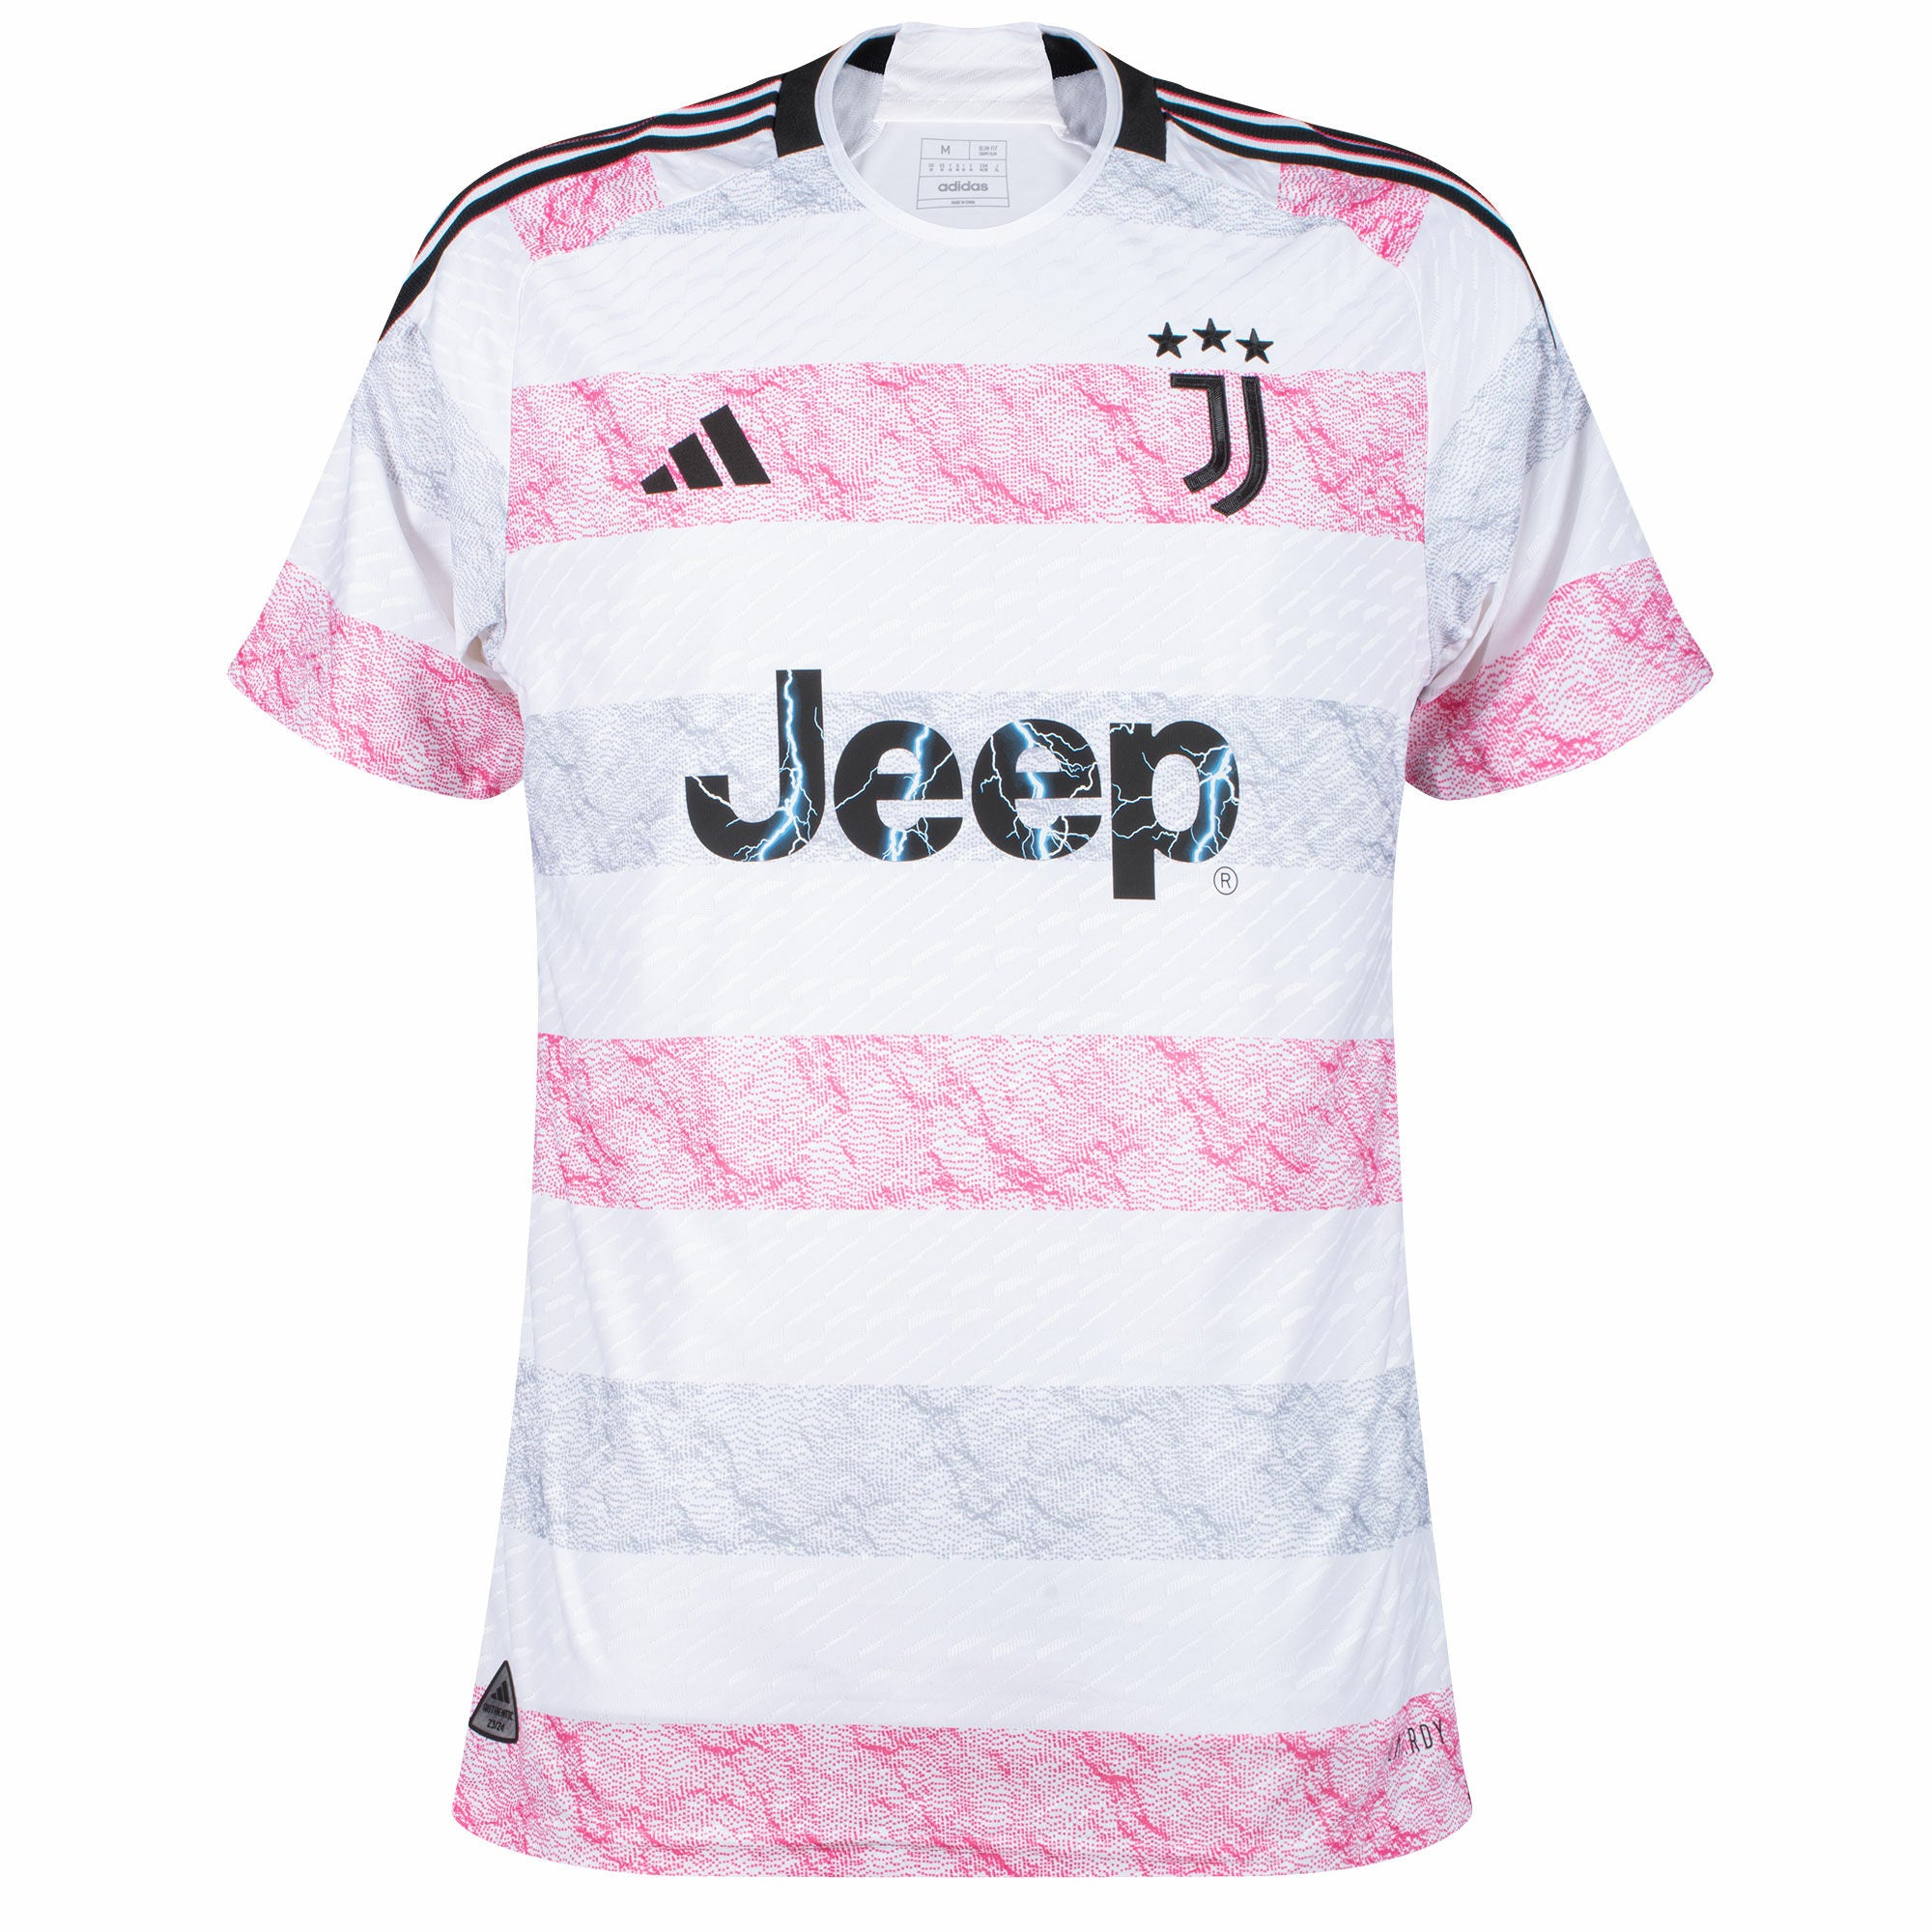 Juventus home jersey 2021/22 Adidas Color White Size XL